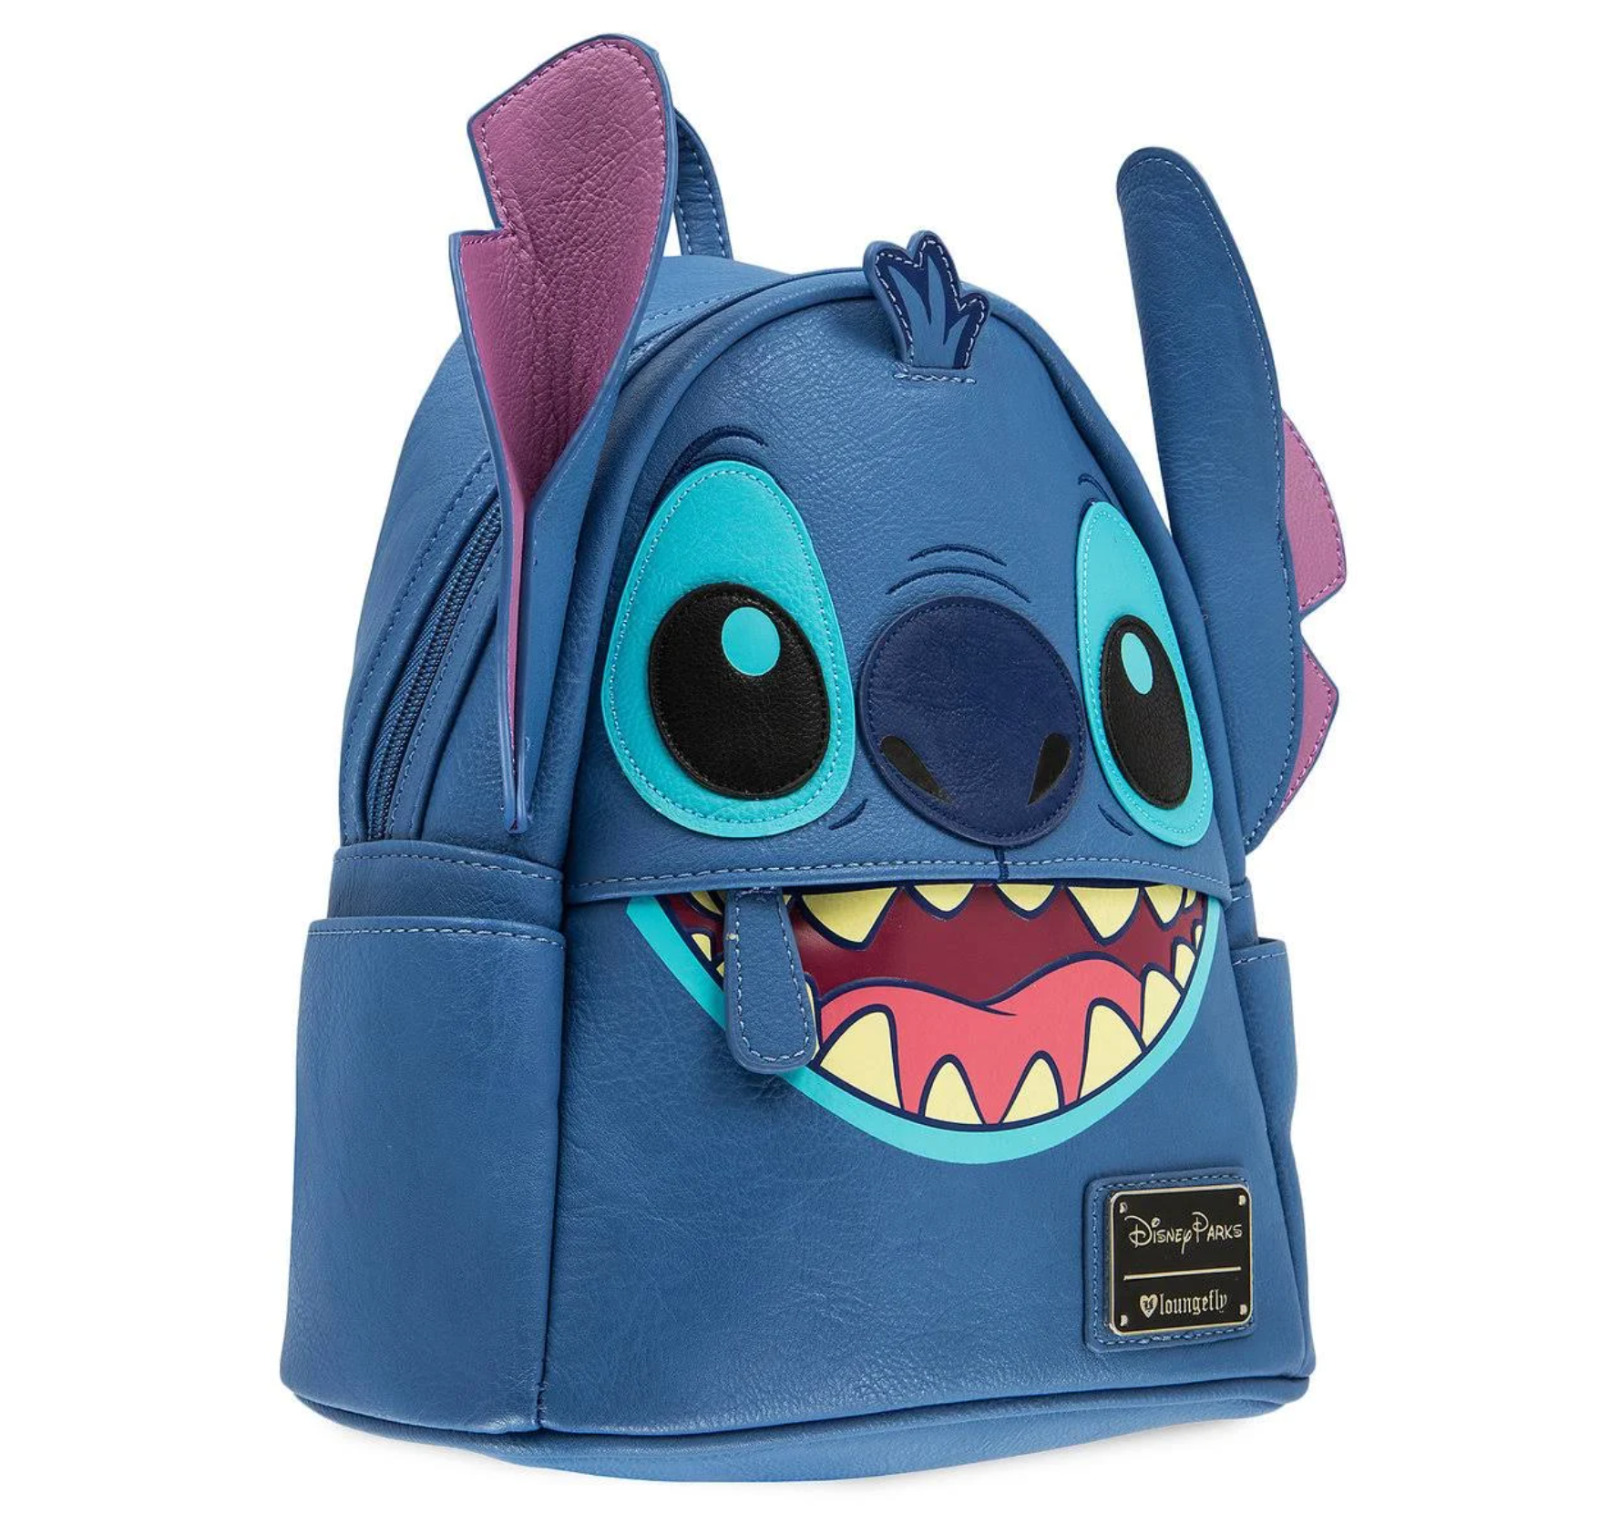 2023 Disney Parks Stitch Head Loungefly Mini Backpack - New with Tags